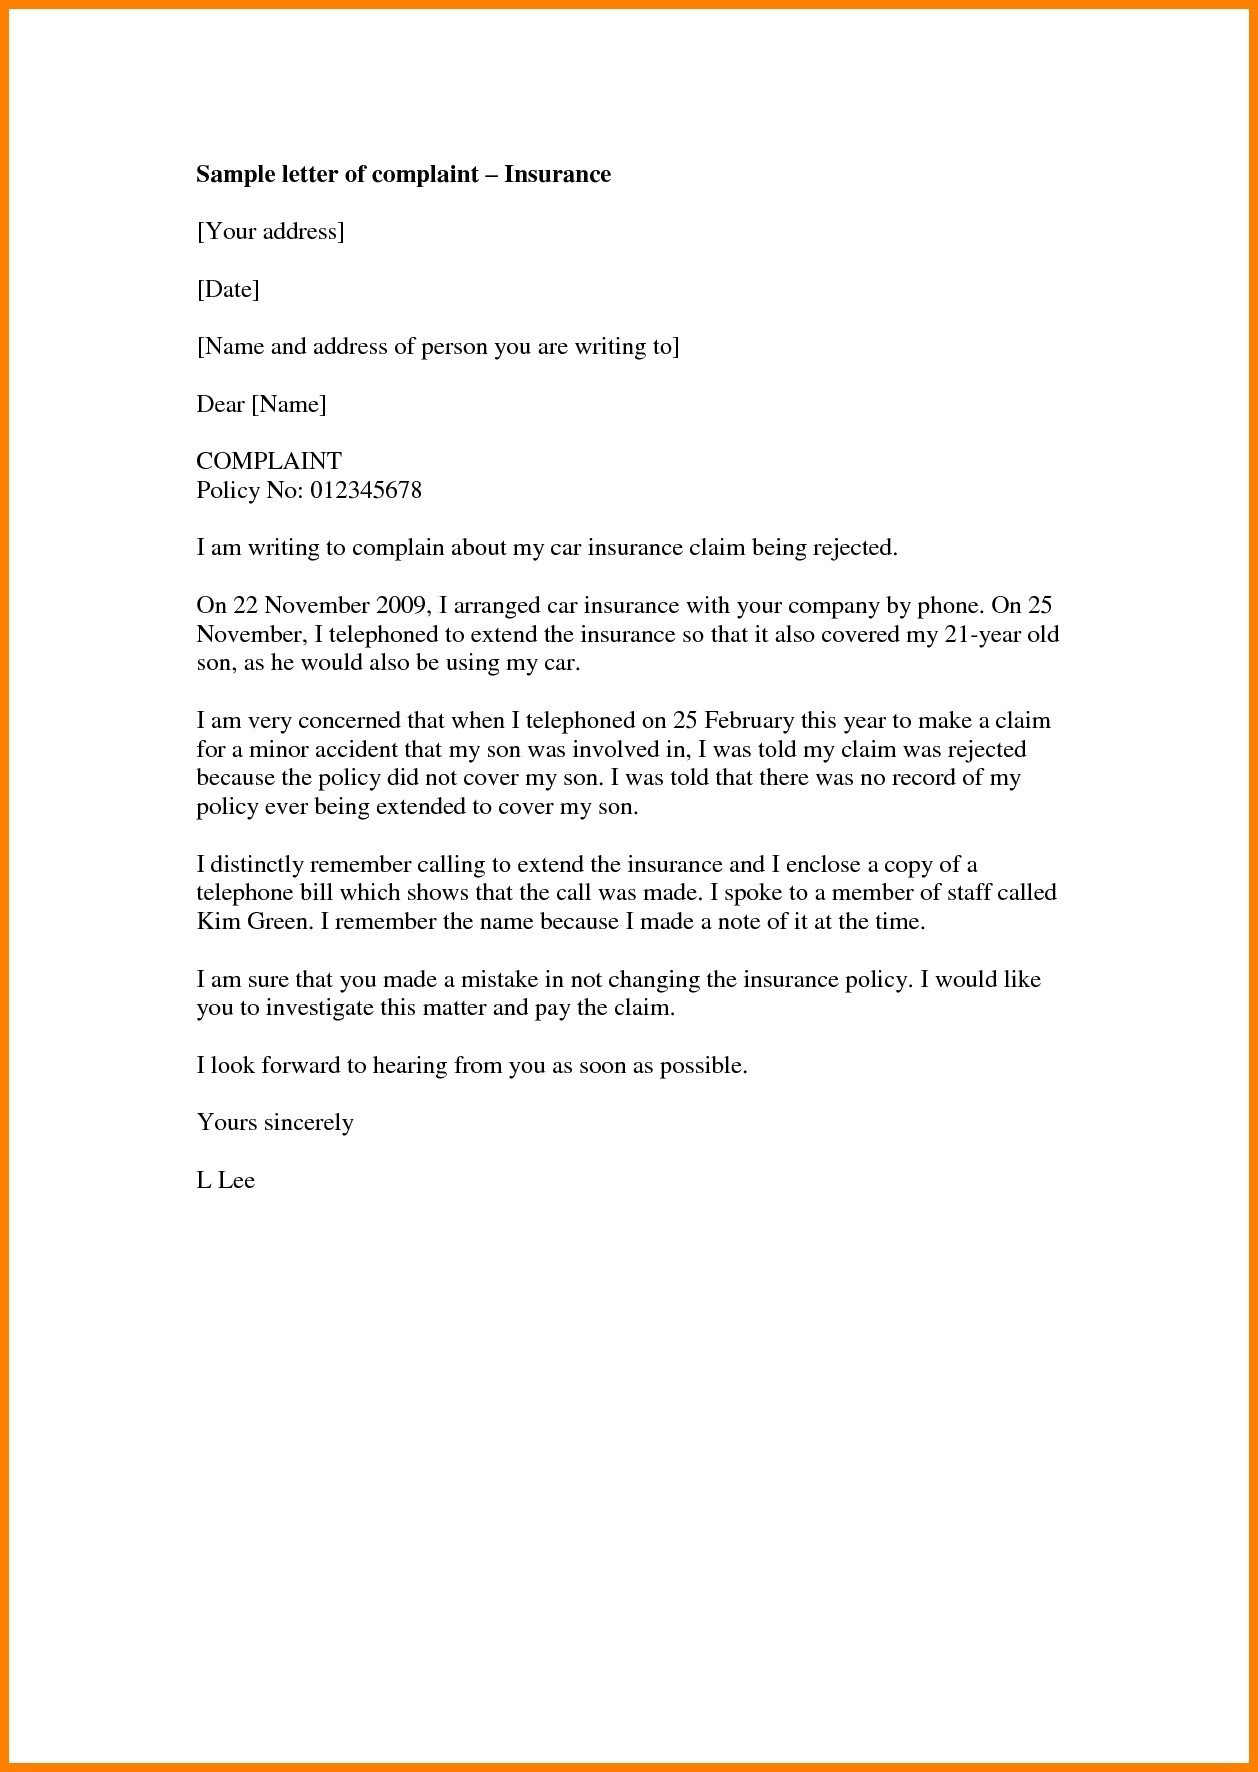 defamation-of-character-letter-template-samples-letter-template-collection